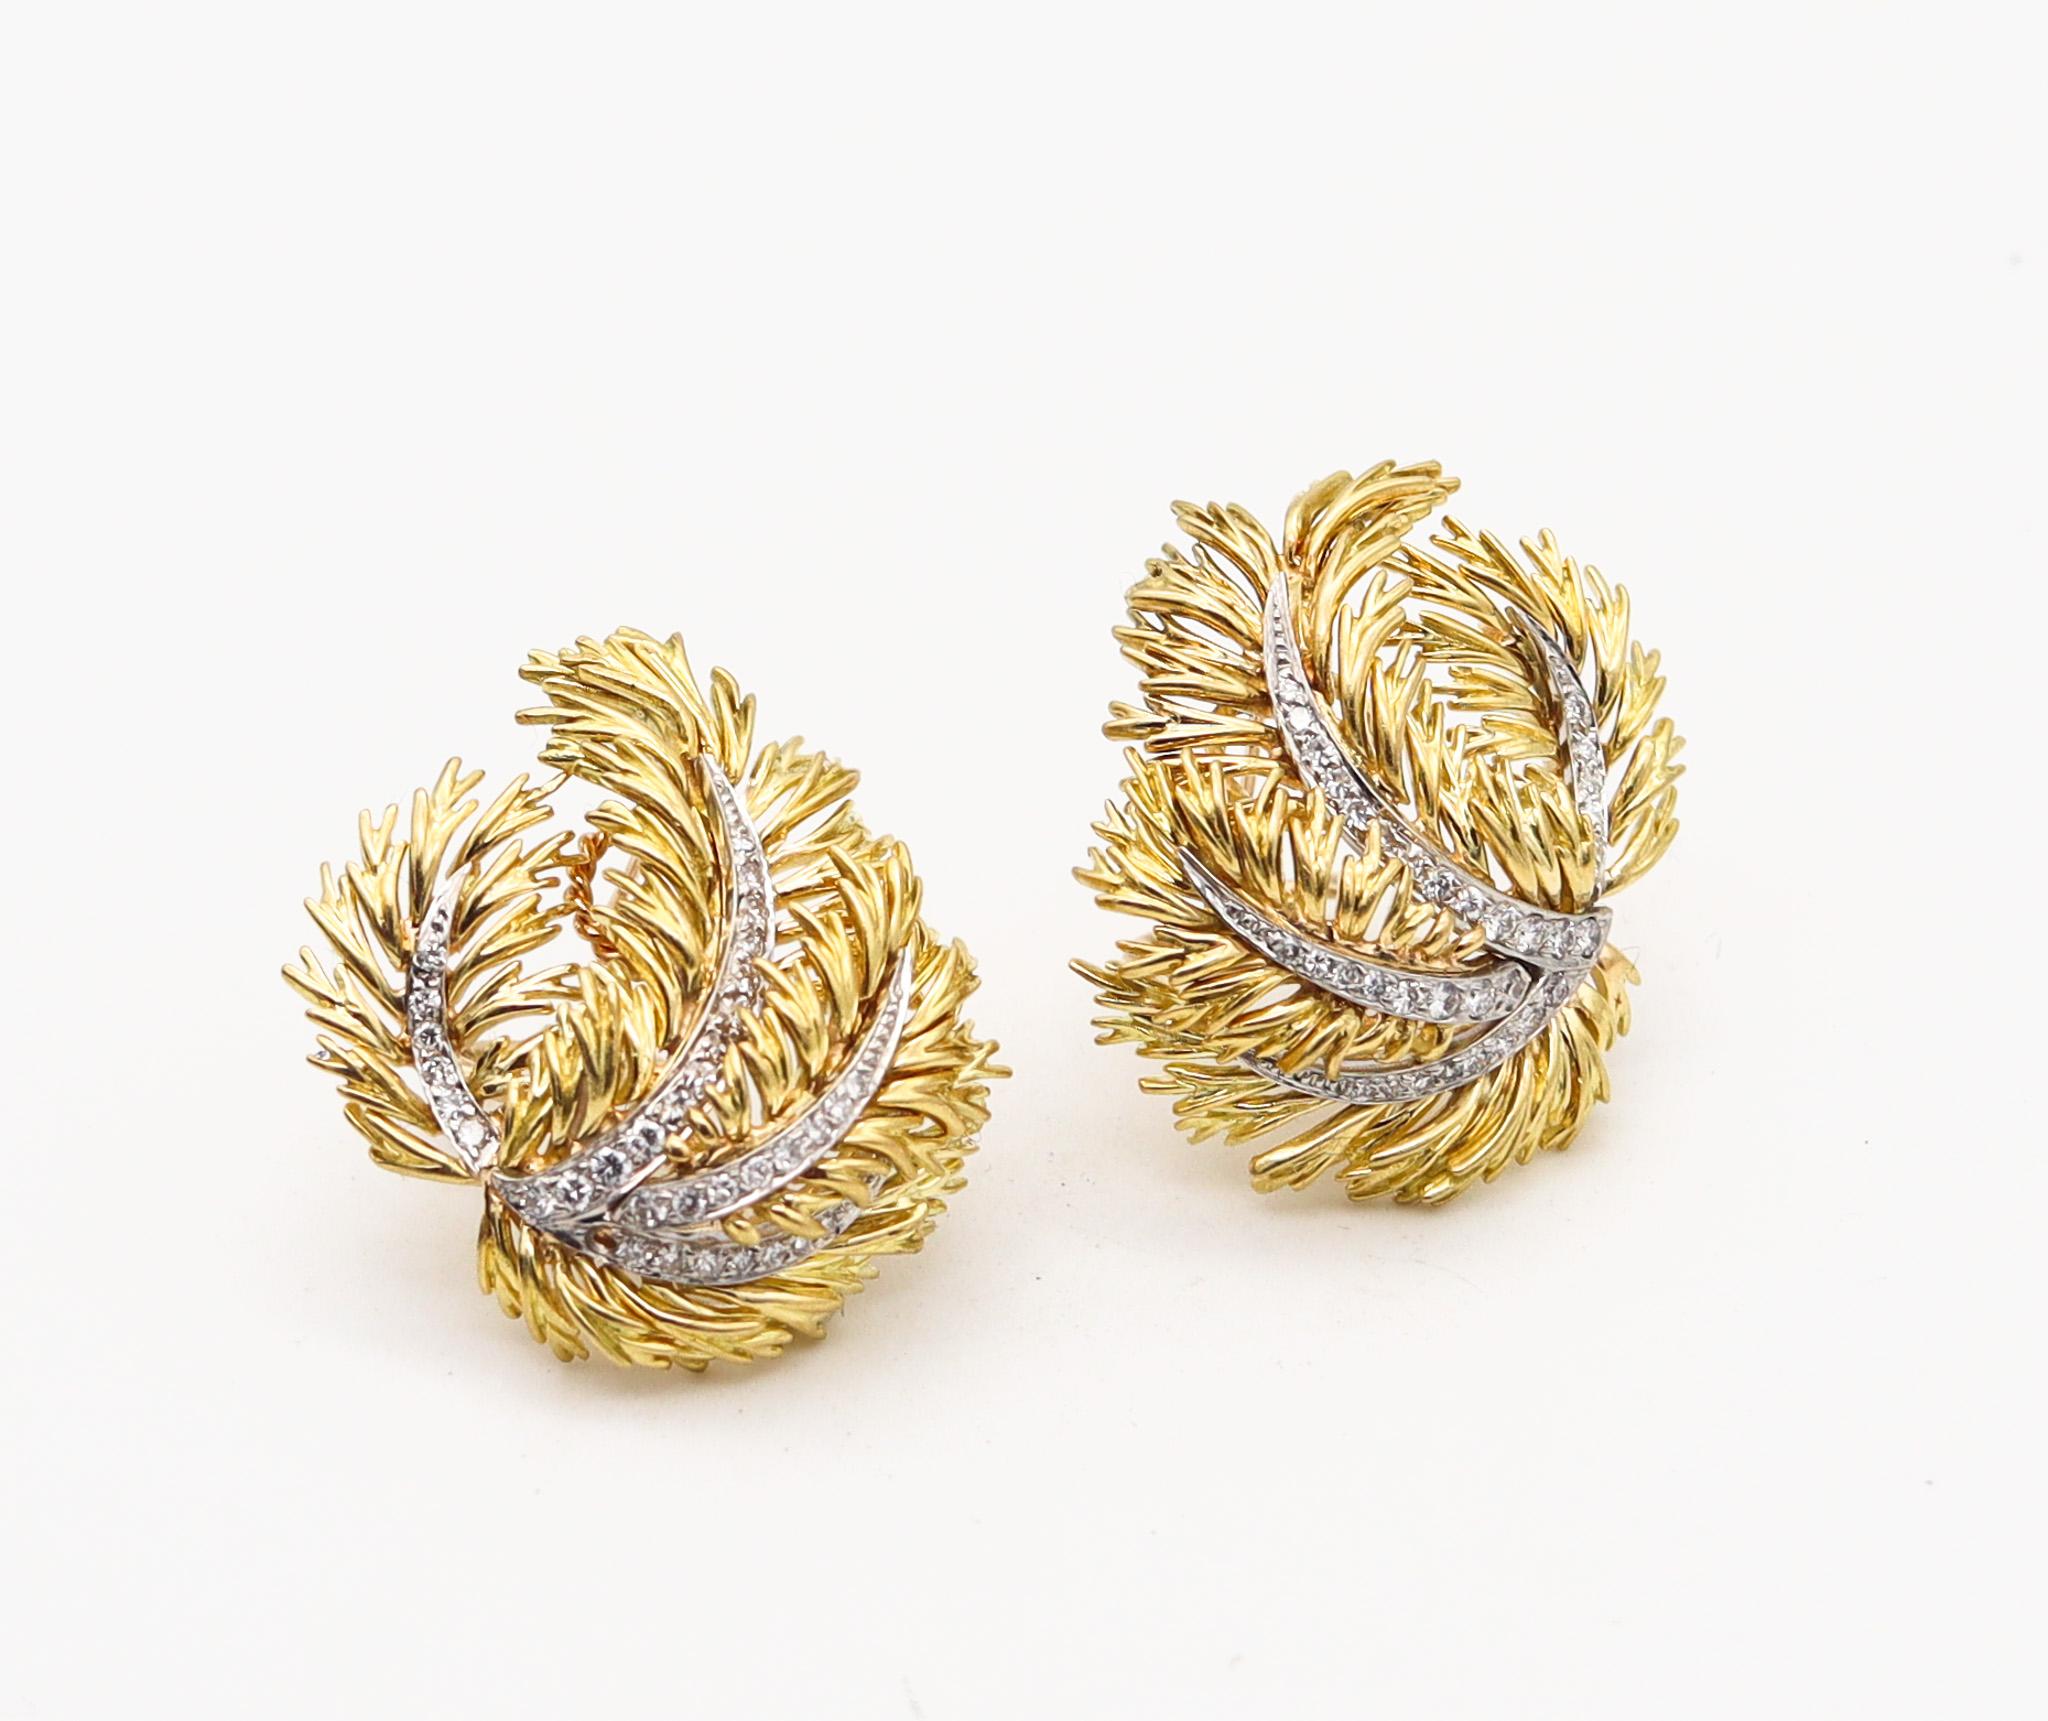 Round Cut Cartier 1960 Clips Earrings In 18Kt Yellow Gold With 1.76 Ctw In VS Diamonds For Sale